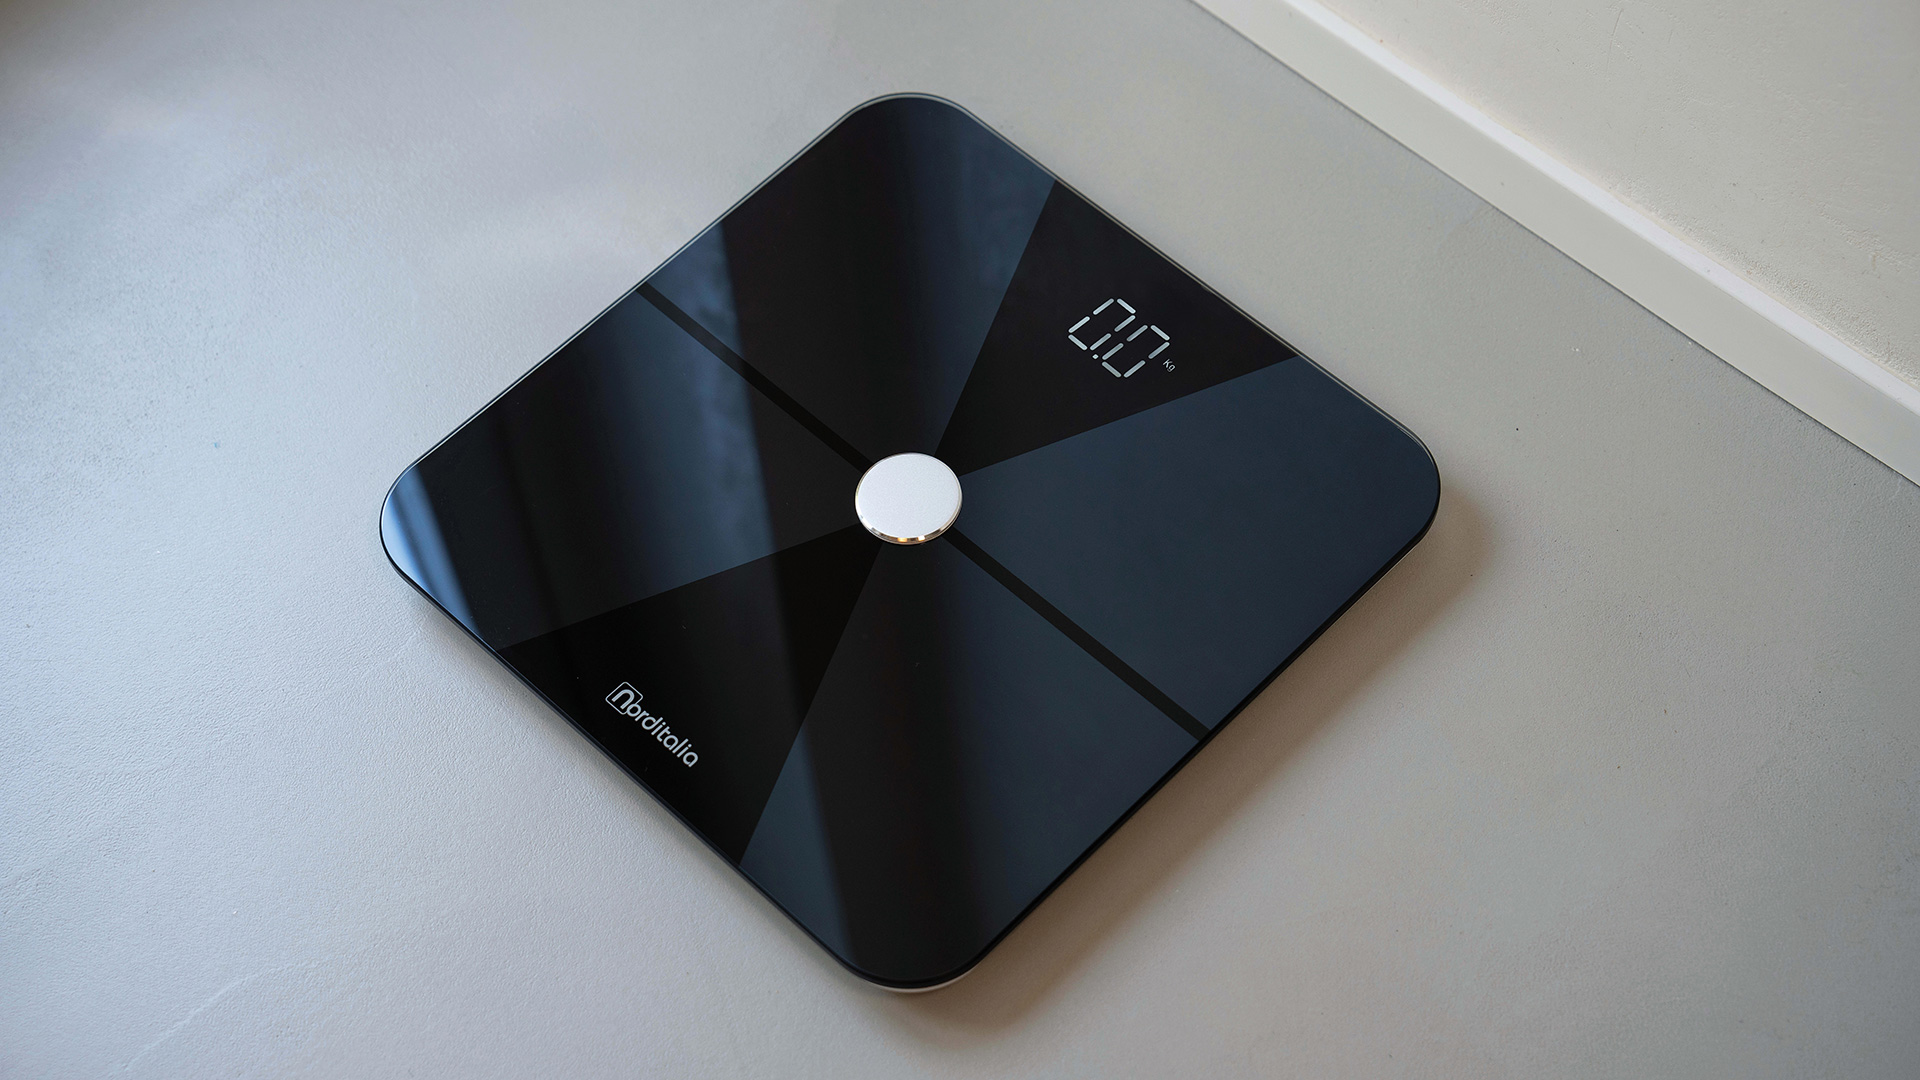 Body Analysis Bluetooth Diagnostic Scale